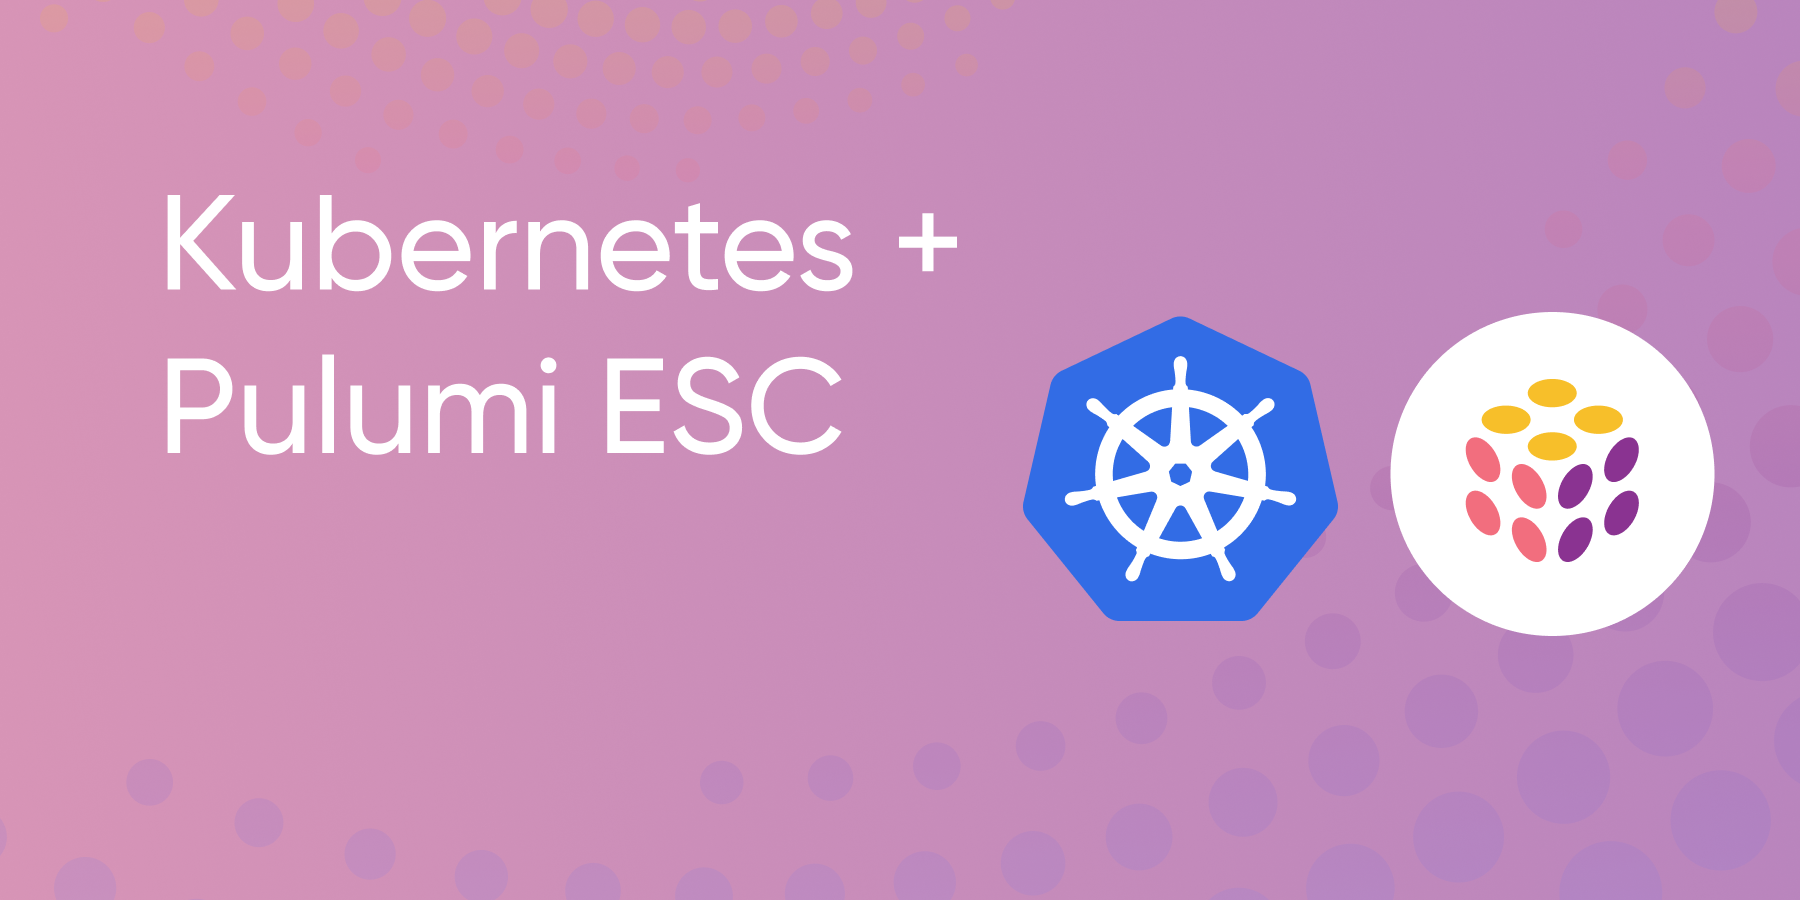 Secure your Kubernetes toolchain with Pulumi ESC and OIDC